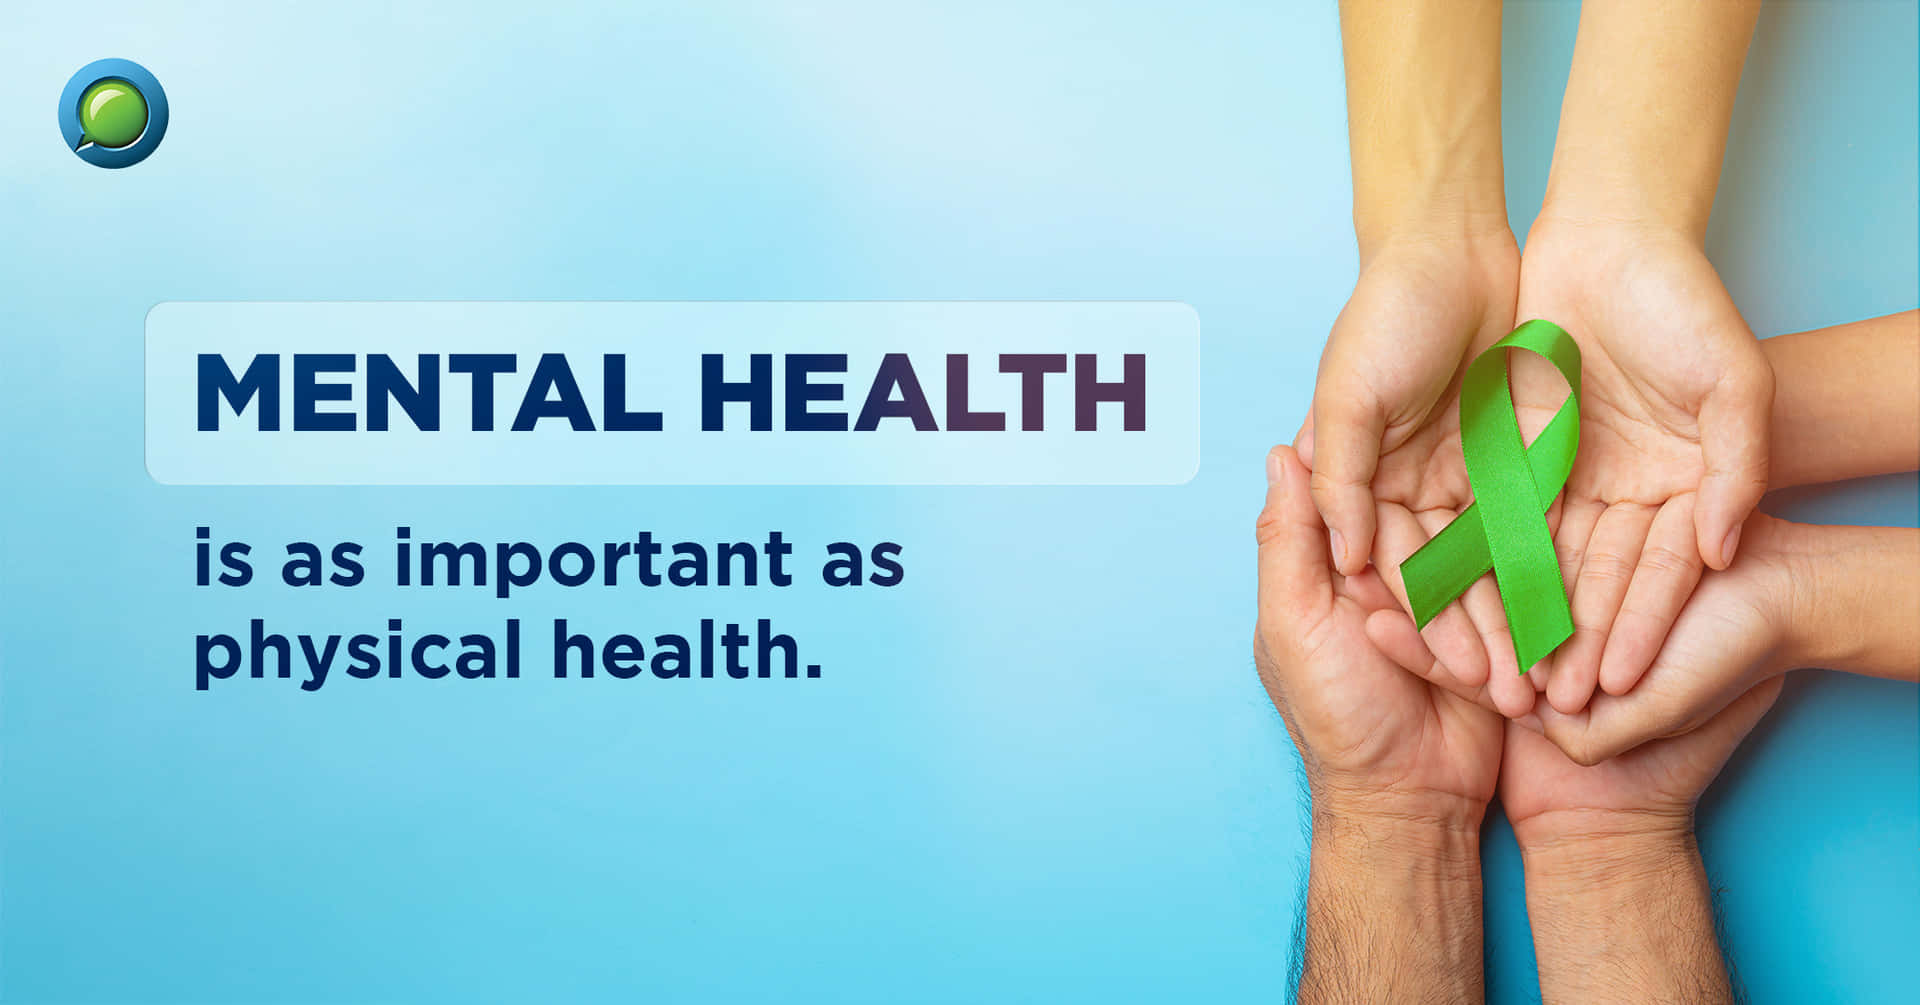 Mental Health Is Important As Physical Health